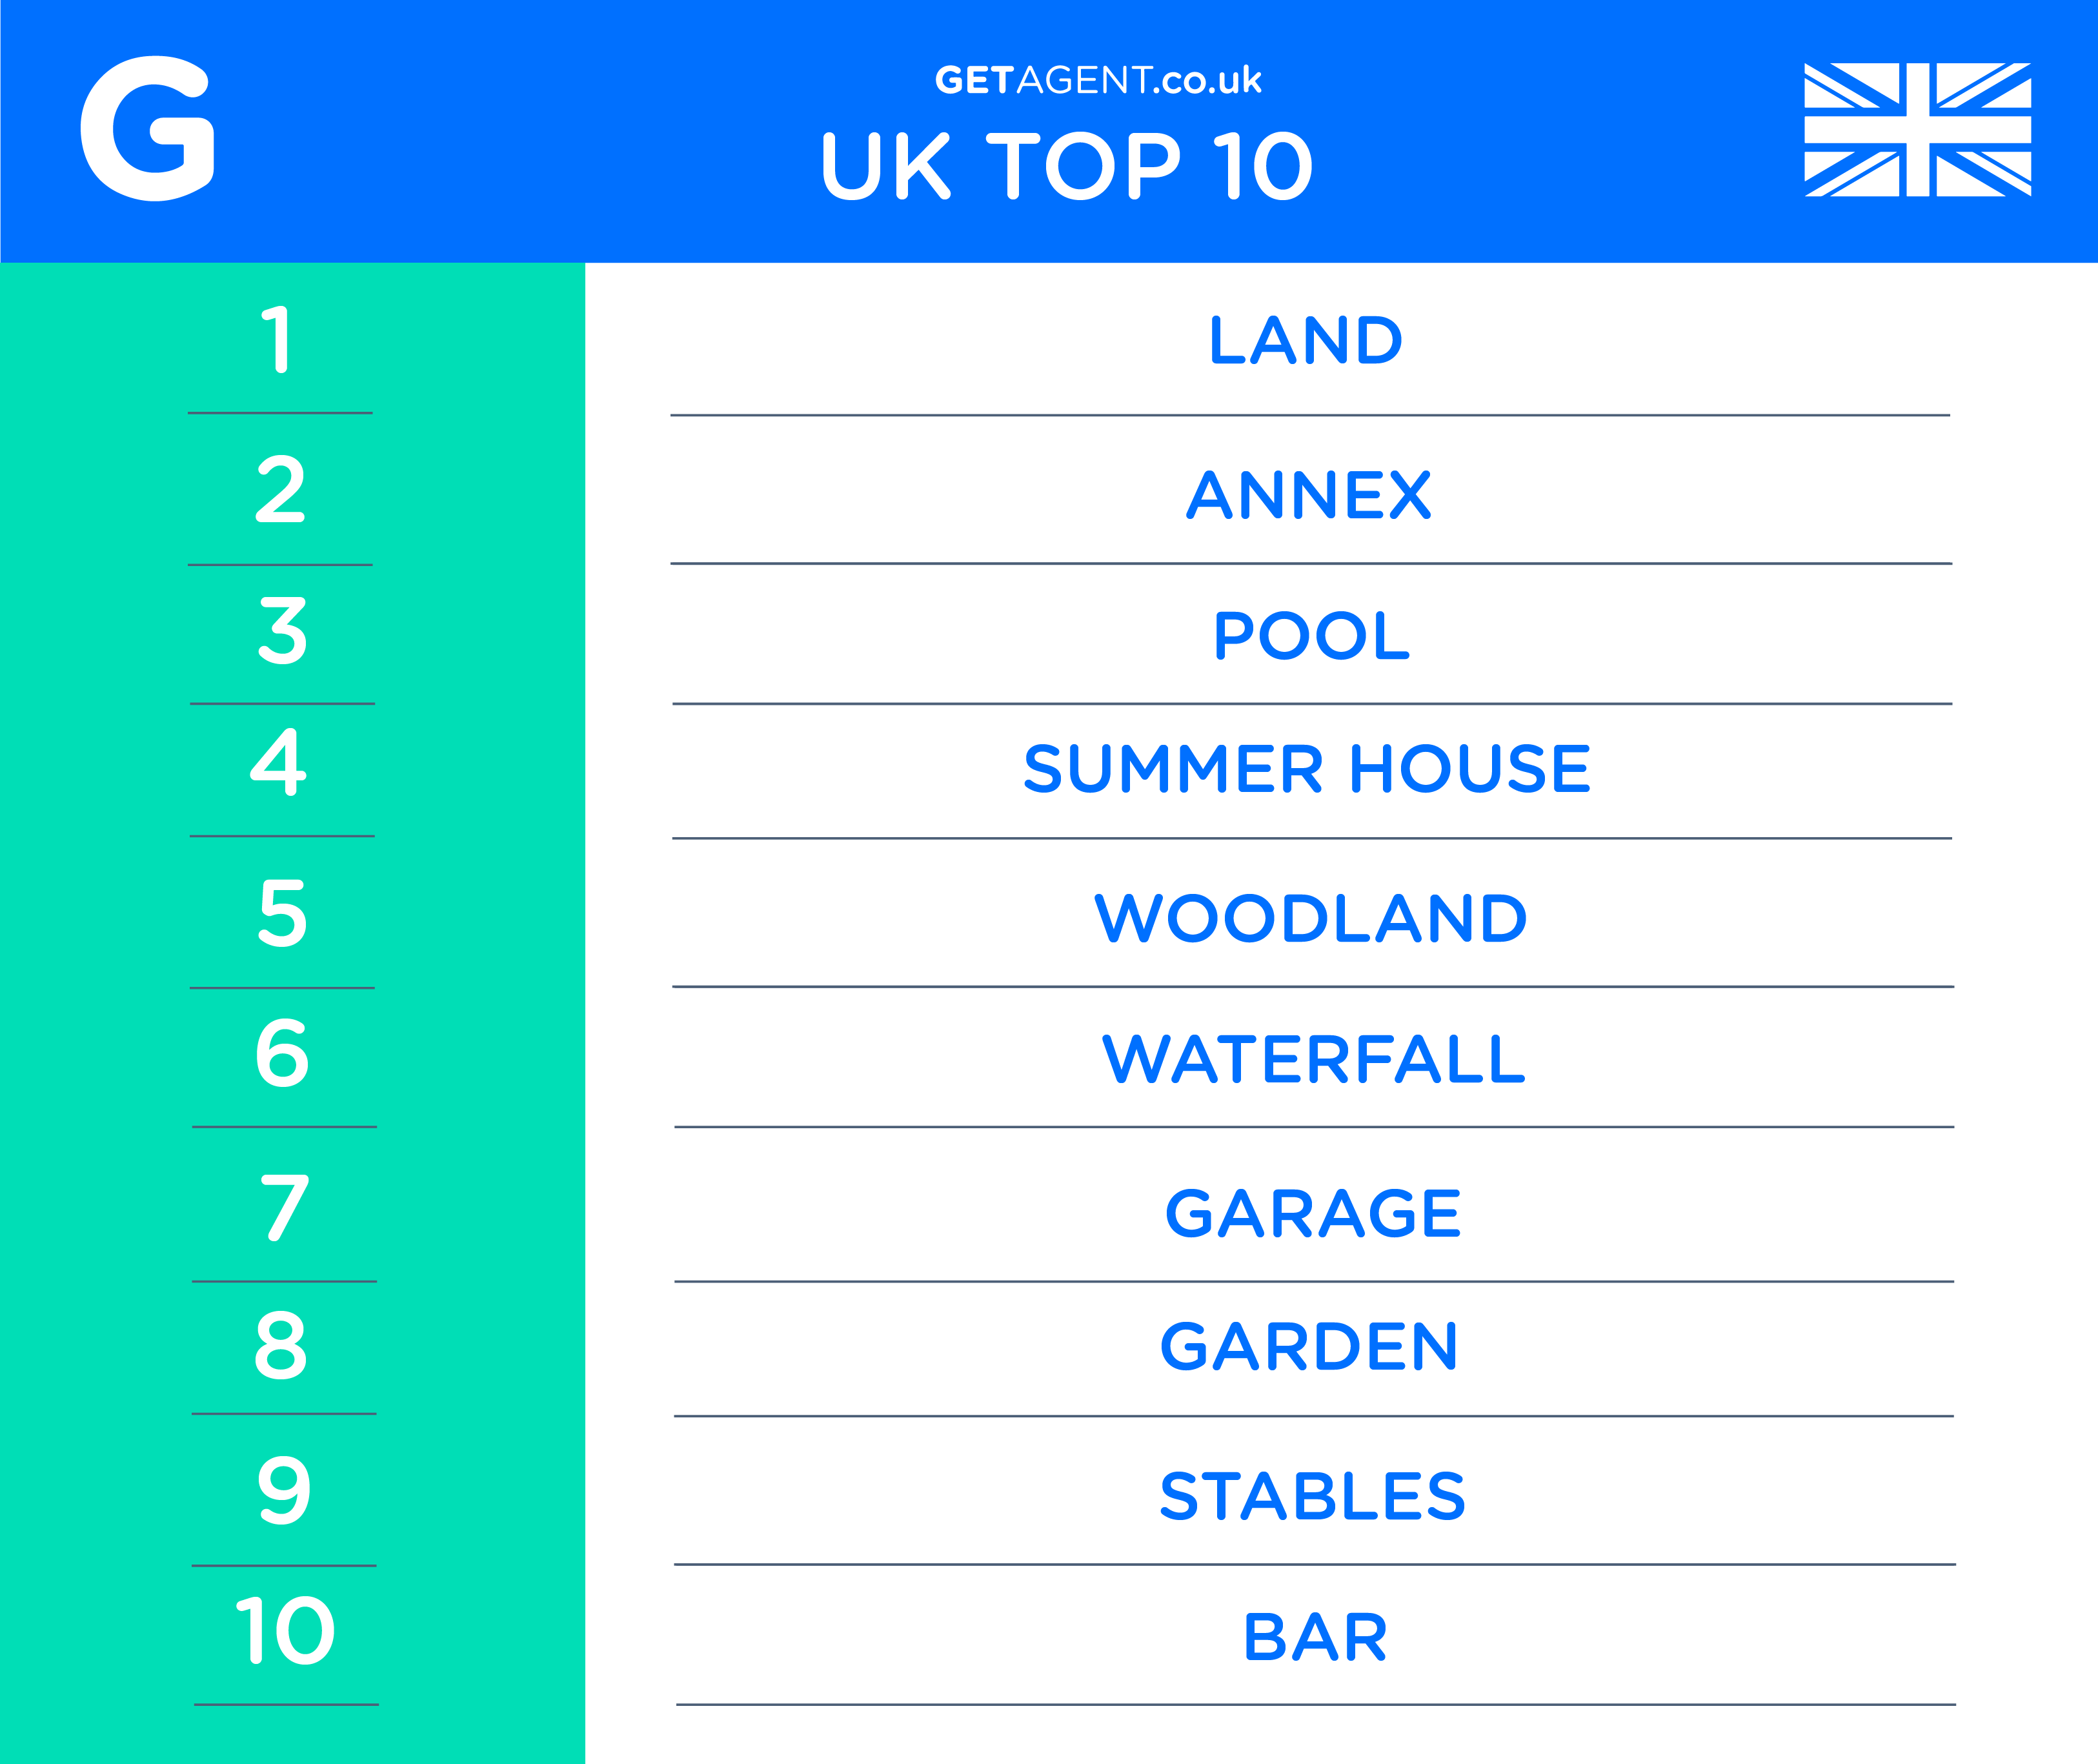 Most wanted house features in the UK TOP 10